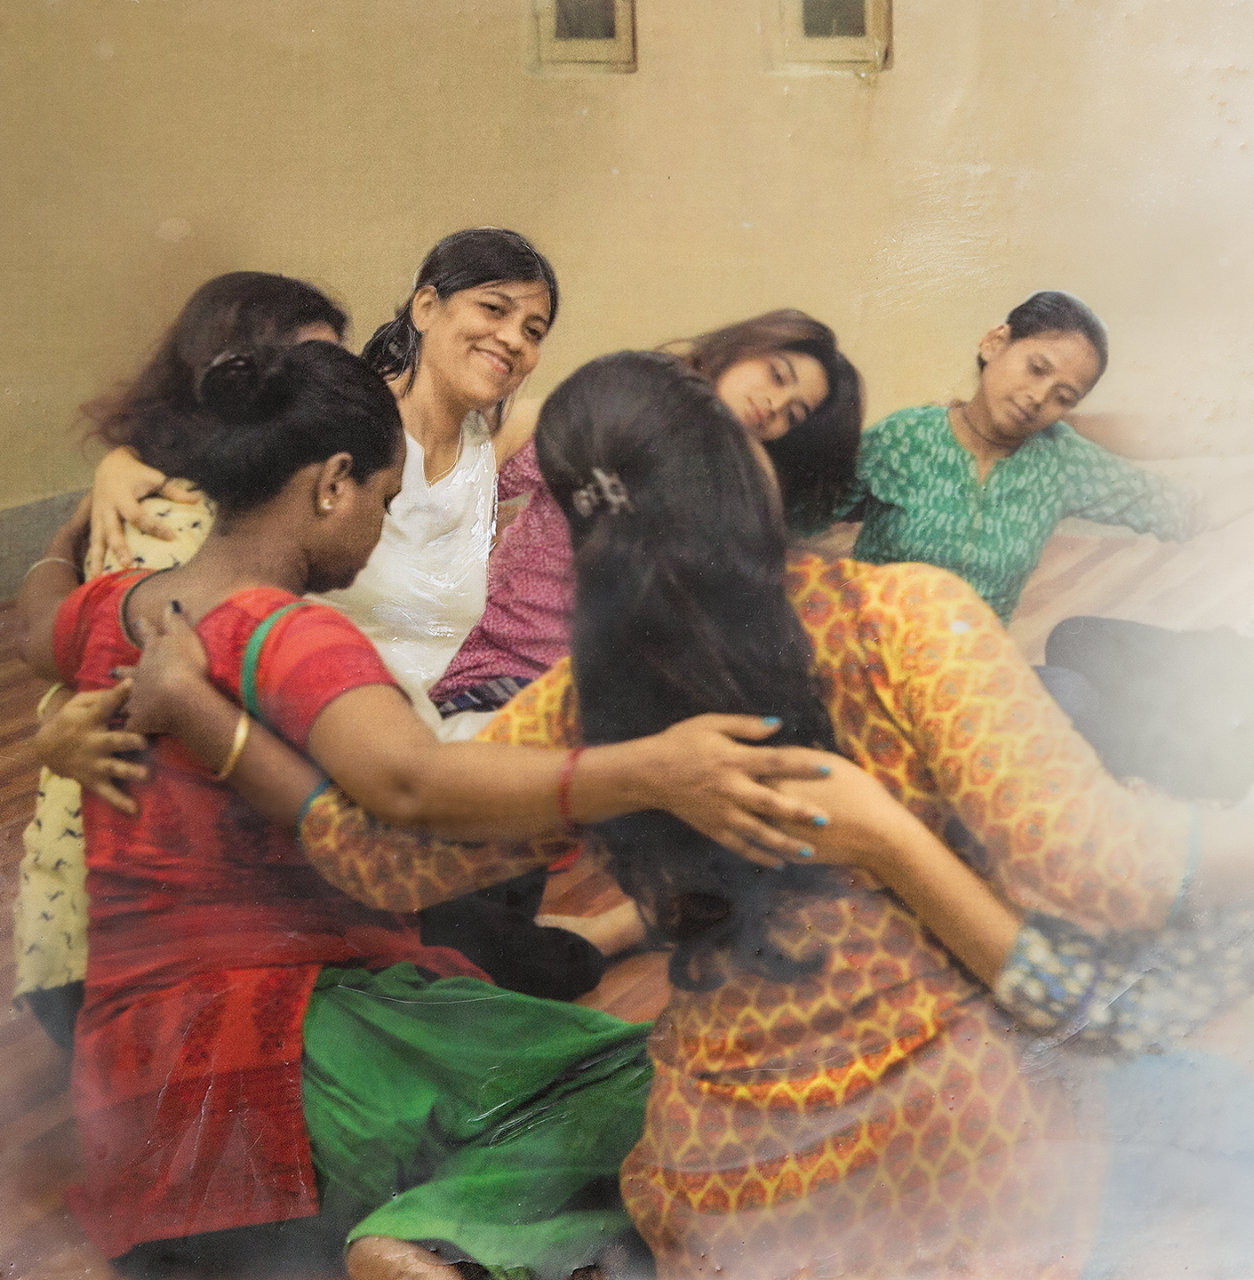 Sohini Chakraborty helping a group of survivors using dance/movement therapy.